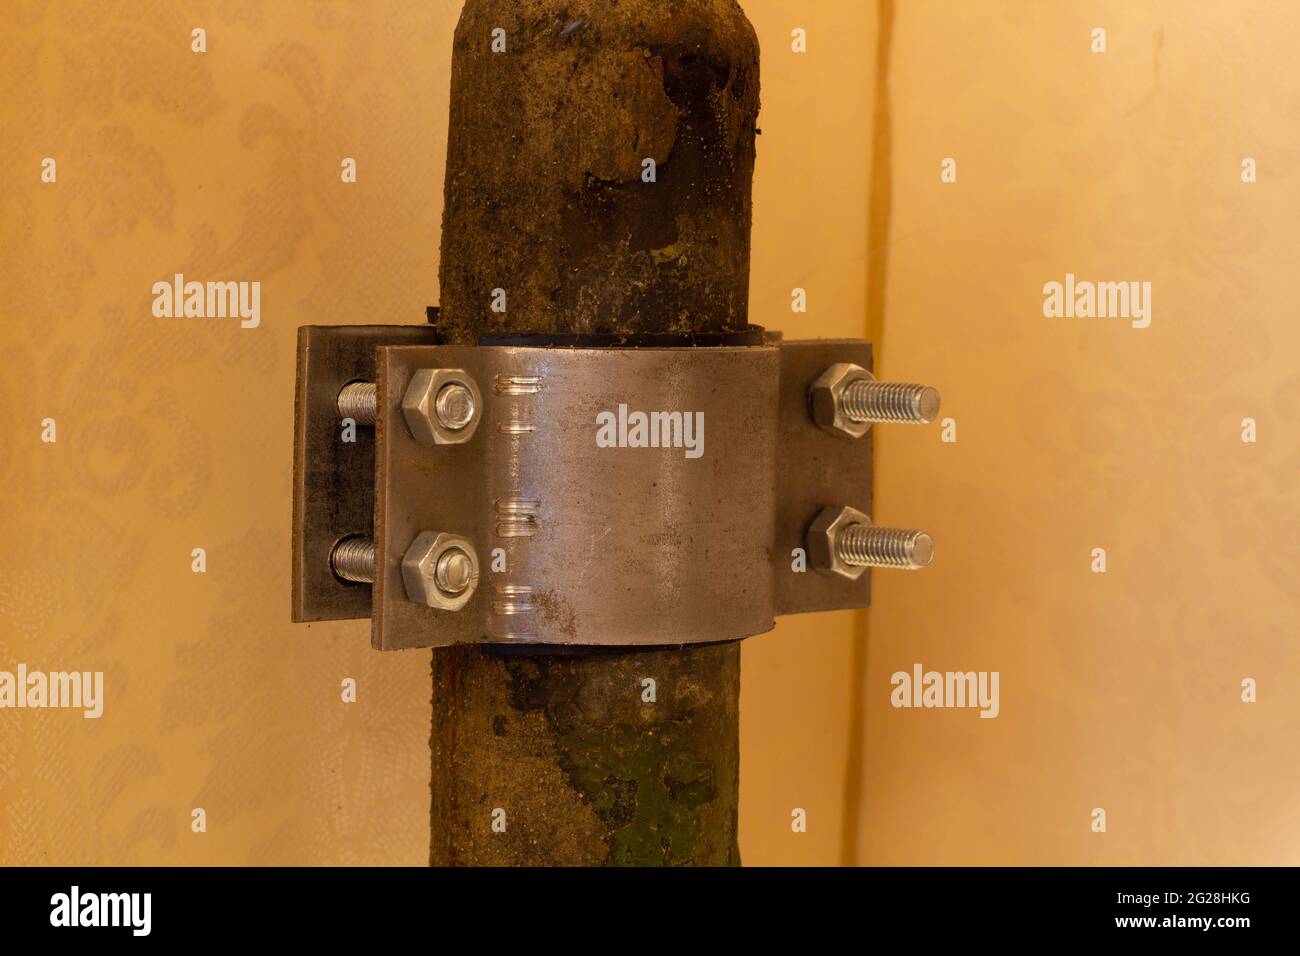 The four-screw M10 stainless steel pipe clamp attached to a rusty metal pipe. Plumbing repair Stock Photo